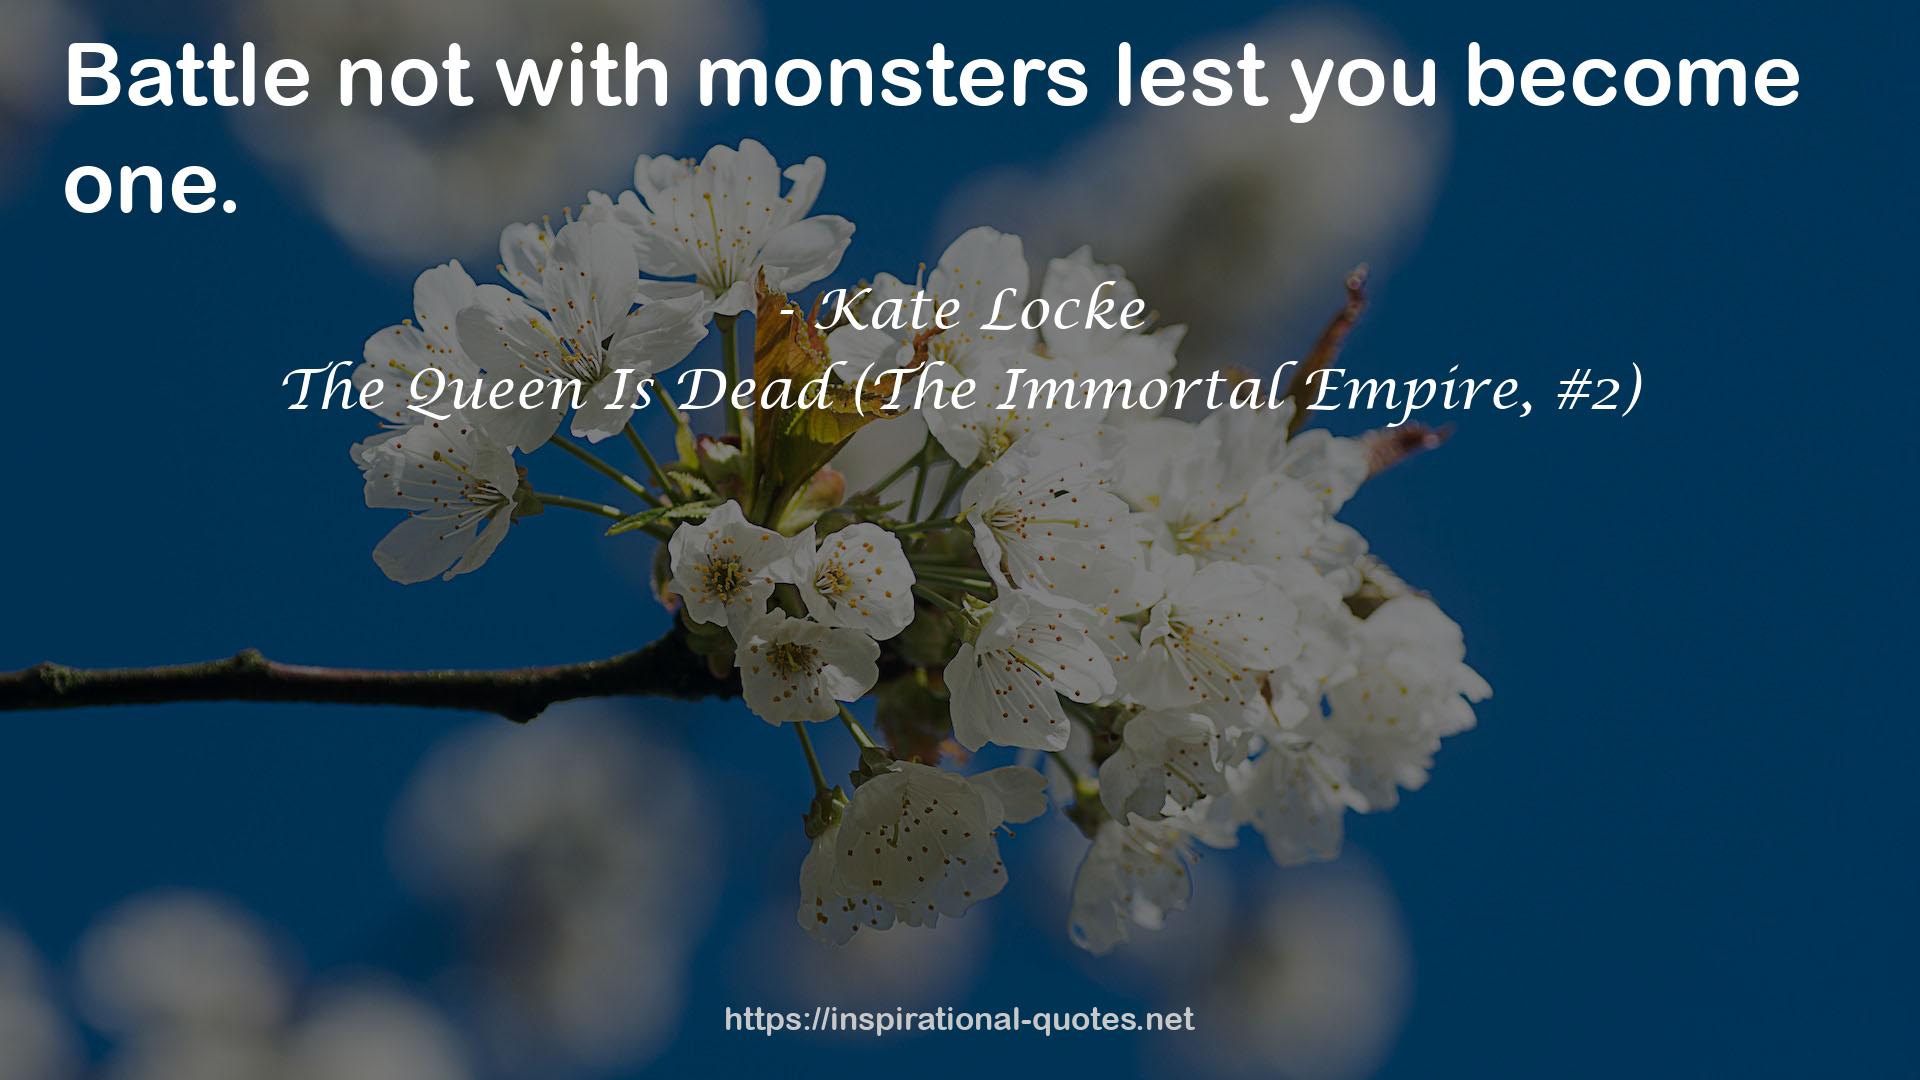 The Queen Is Dead (The Immortal Empire, #2) QUOTES